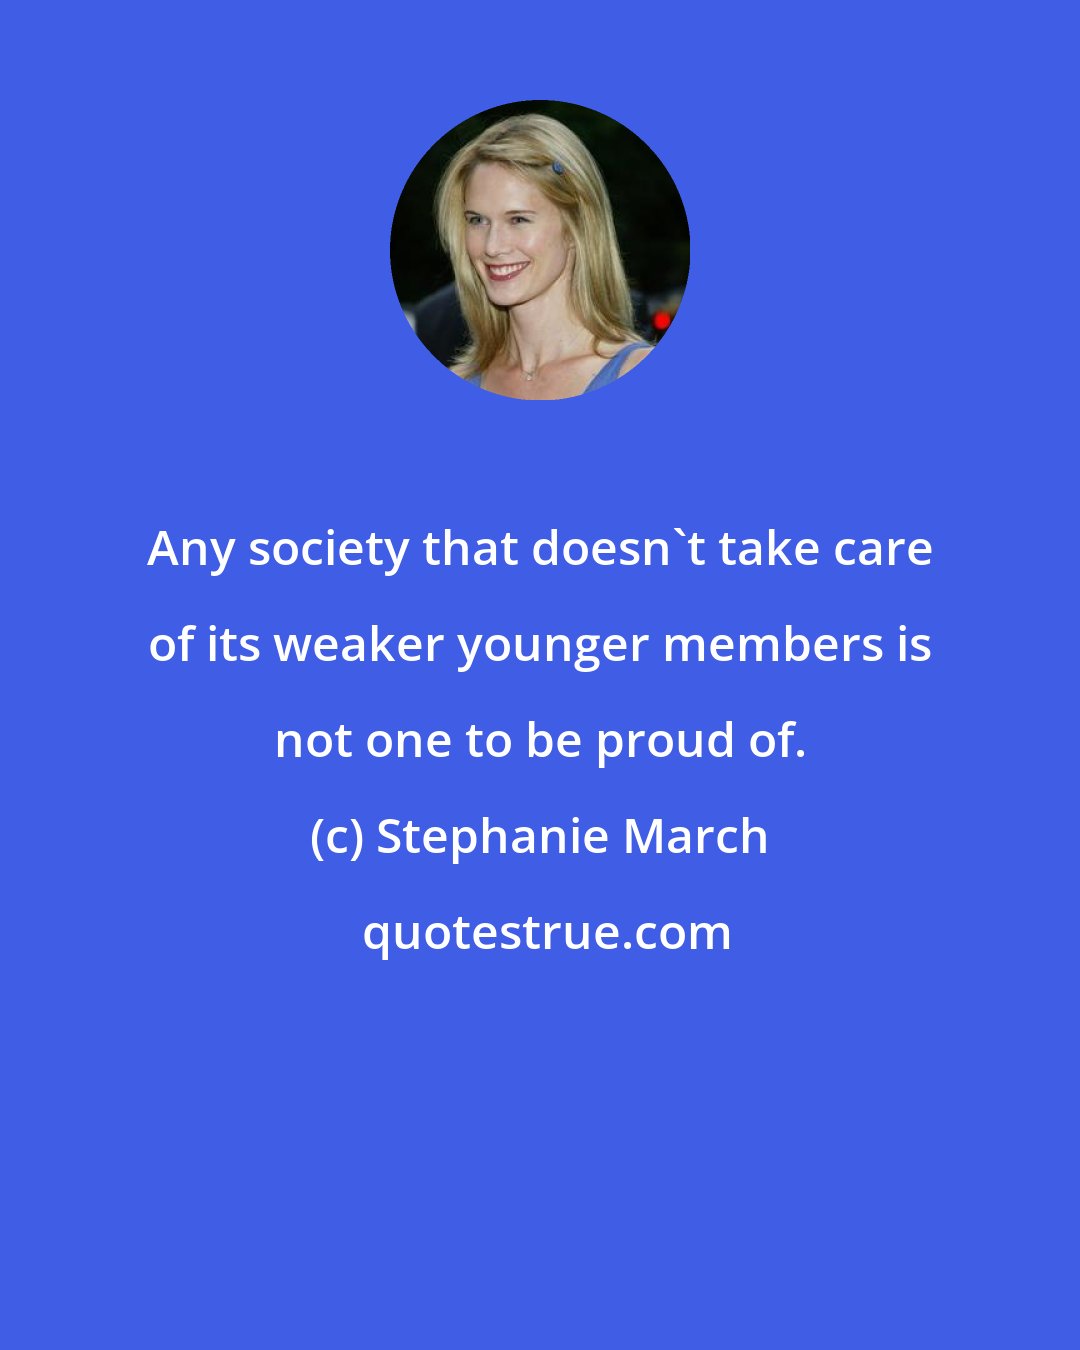 Stephanie March: Any society that doesn't take care of its weaker younger members is not one to be proud of.